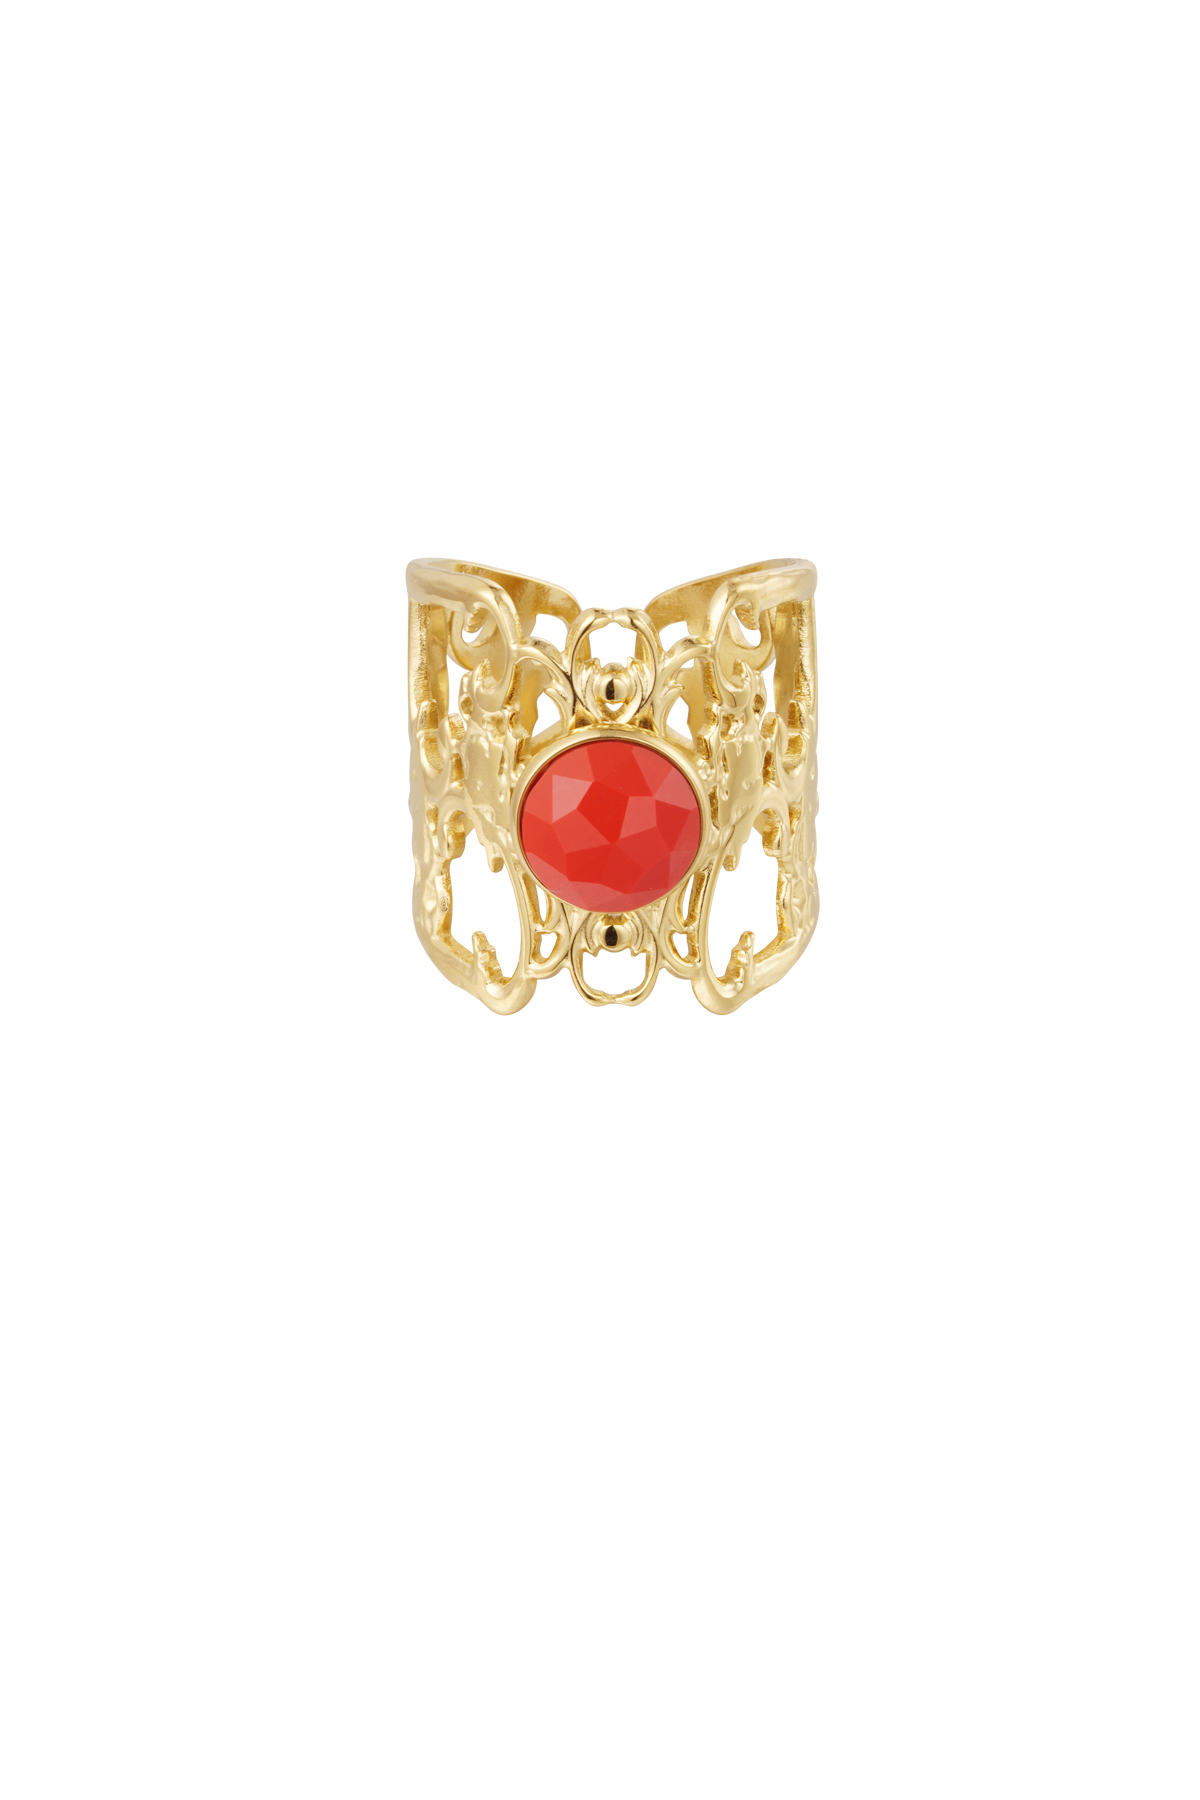 Ring gracefully openwork with stone - red